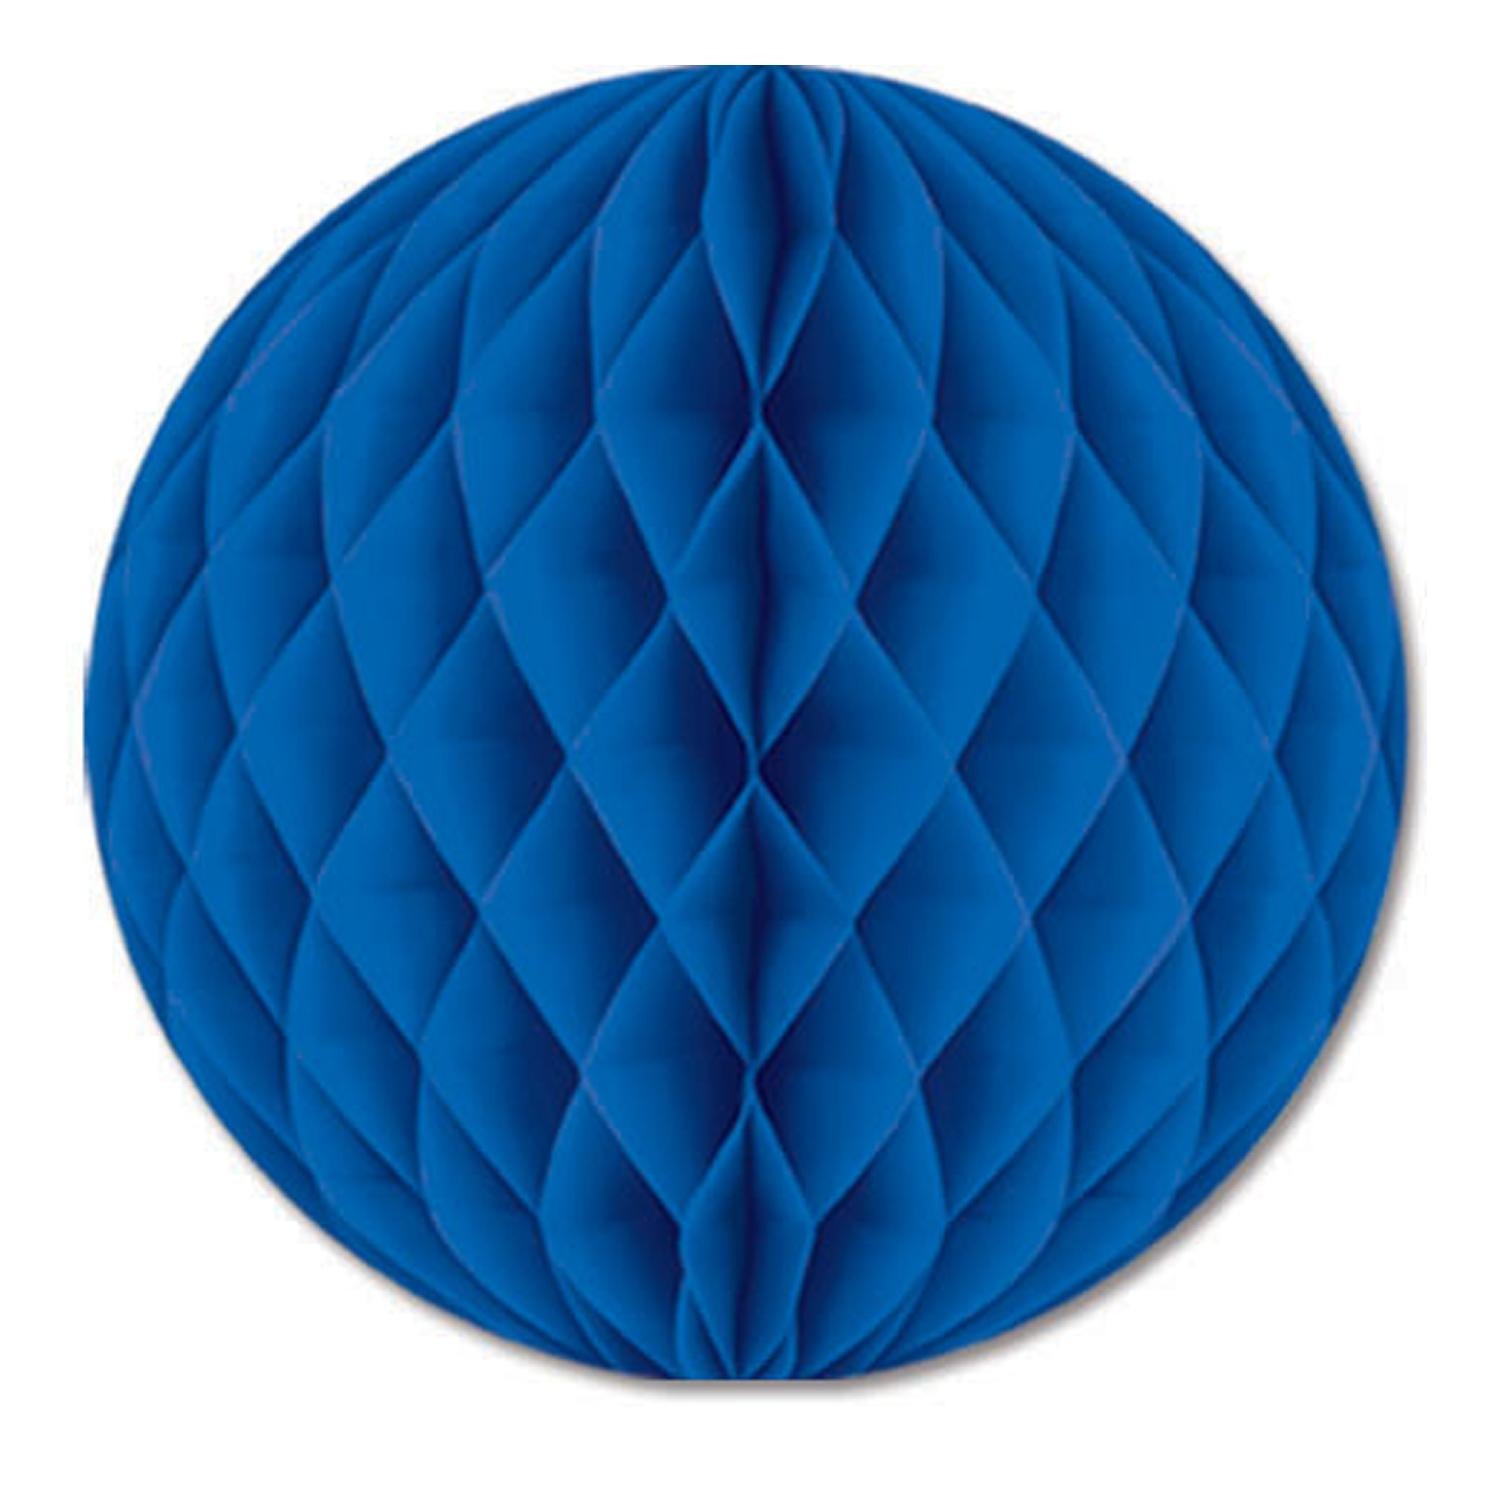 Beistle Party Tissue Ball - blue